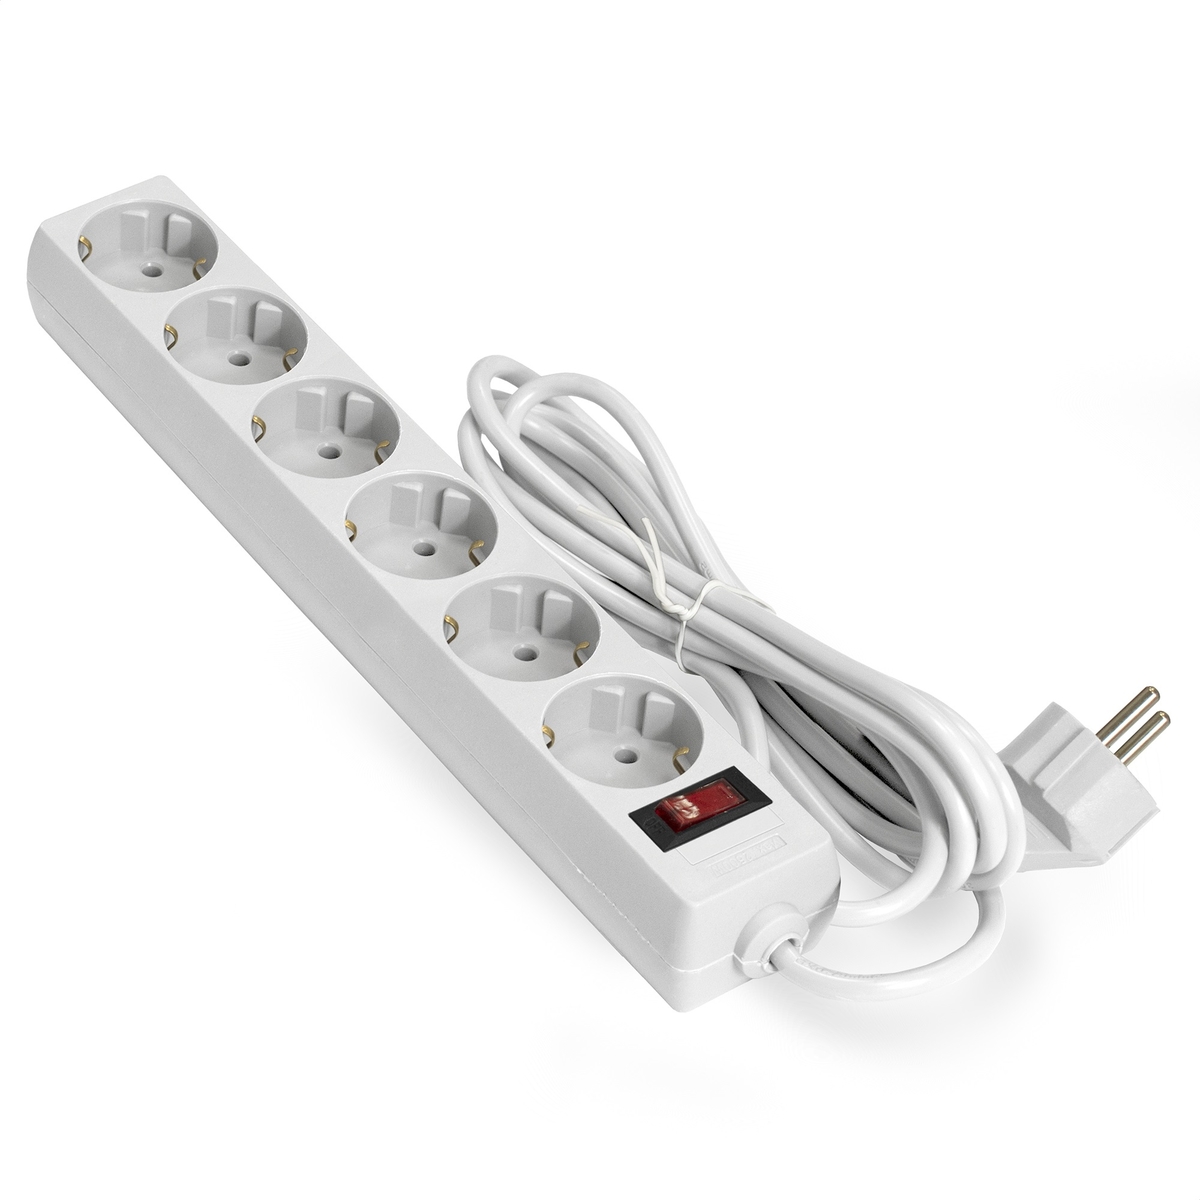 Surge protector ExeGate SP-6-1.8W